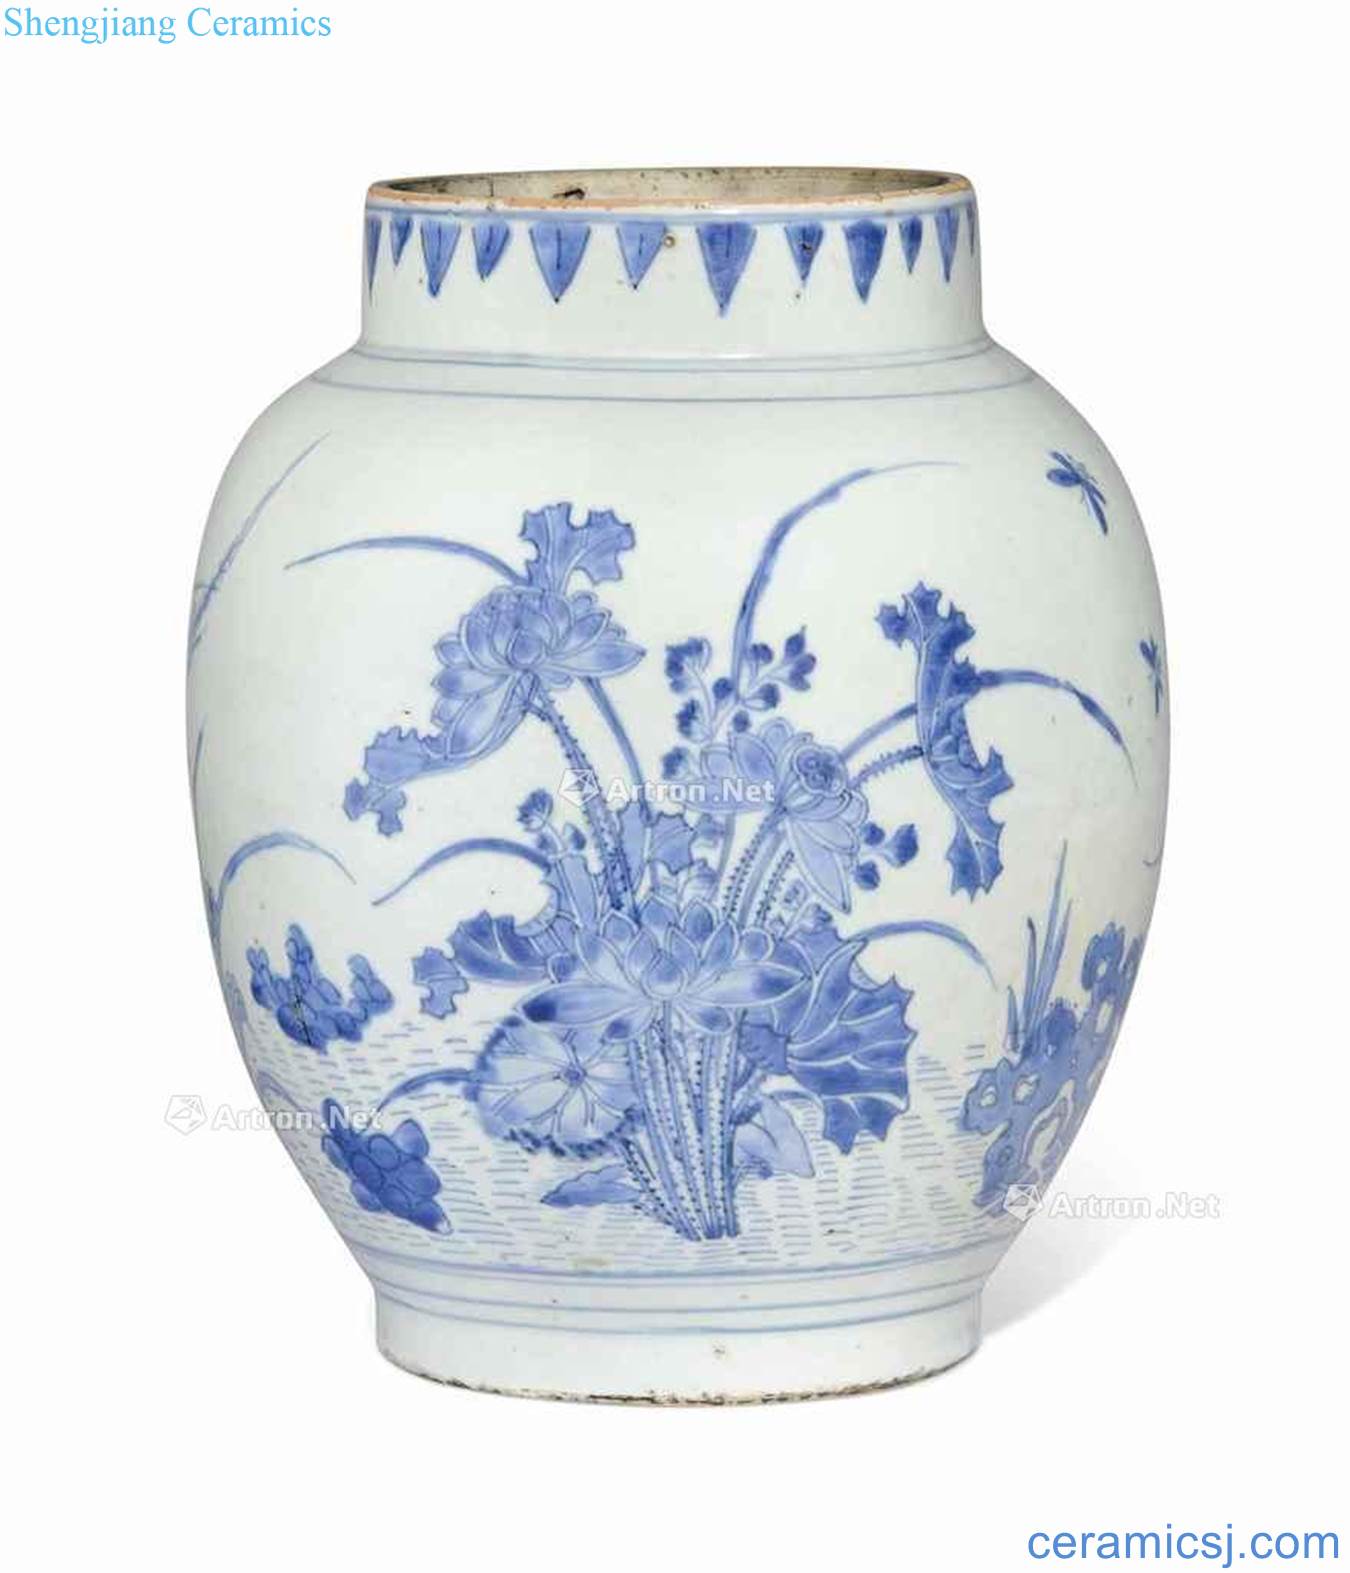 The late Ming dynasty Blue and white flowers and birds figure cans